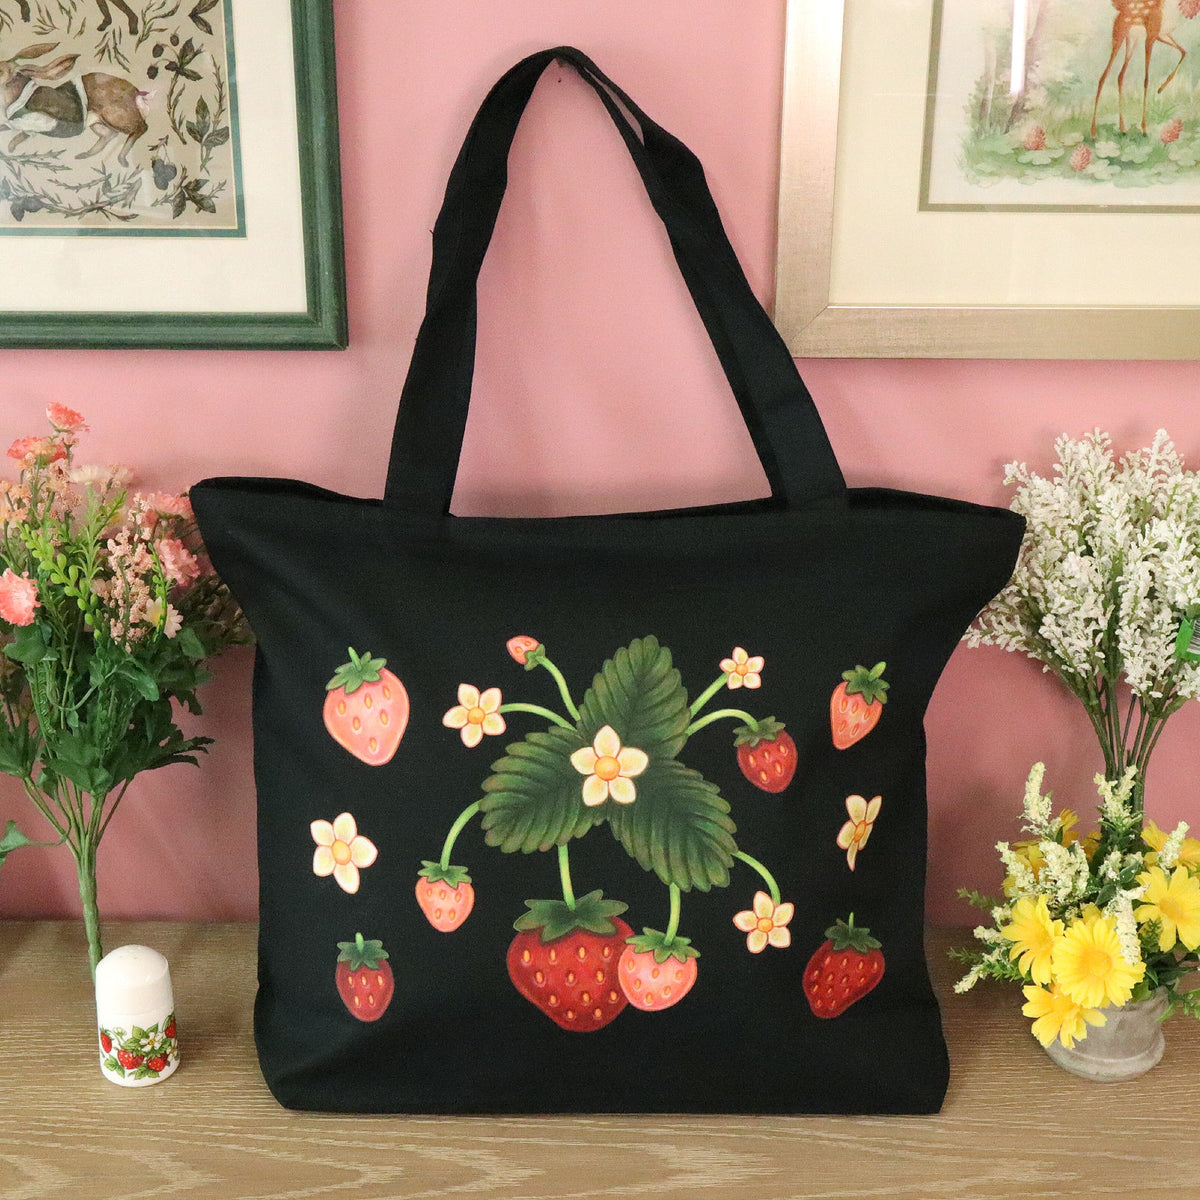 &quot;Strawberry&quot; Zippered Tote Bag - Black